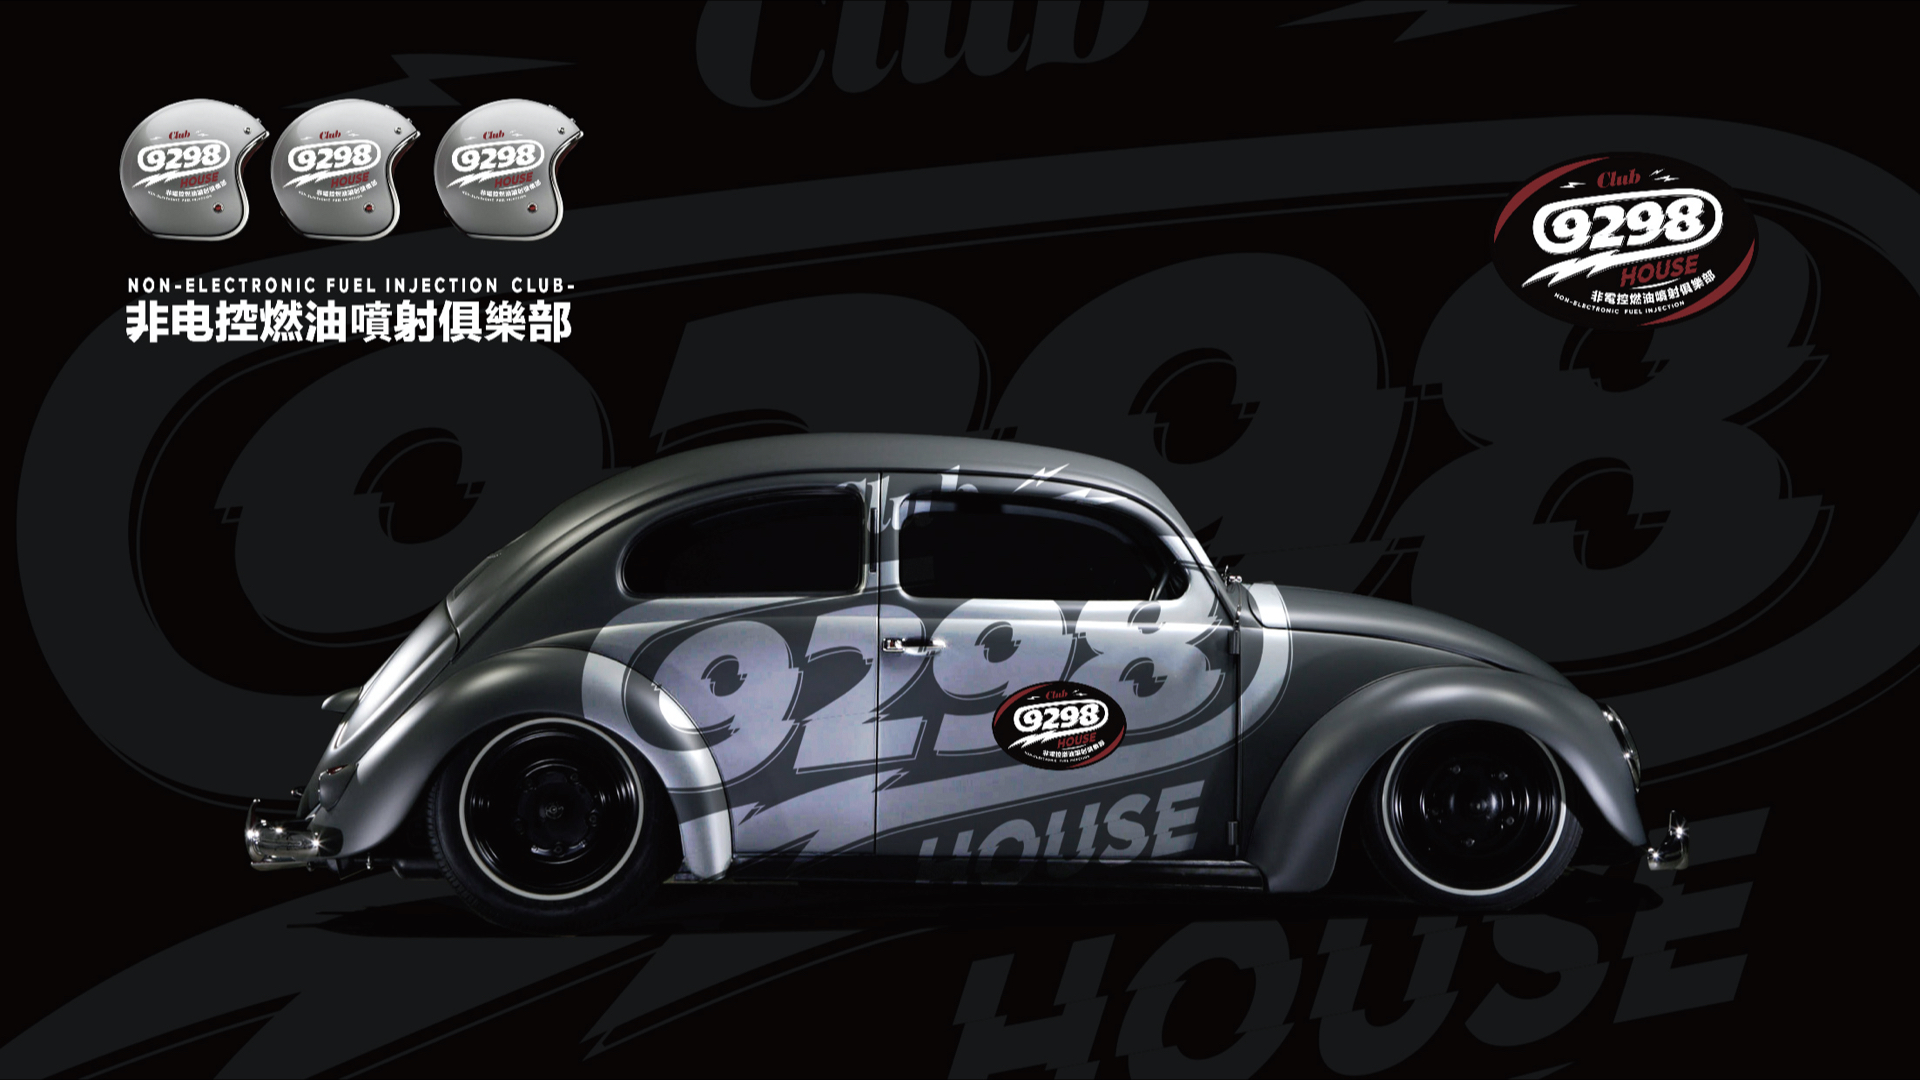 Group1 Case | Font logo Non-Electronic Fuel Injection Club